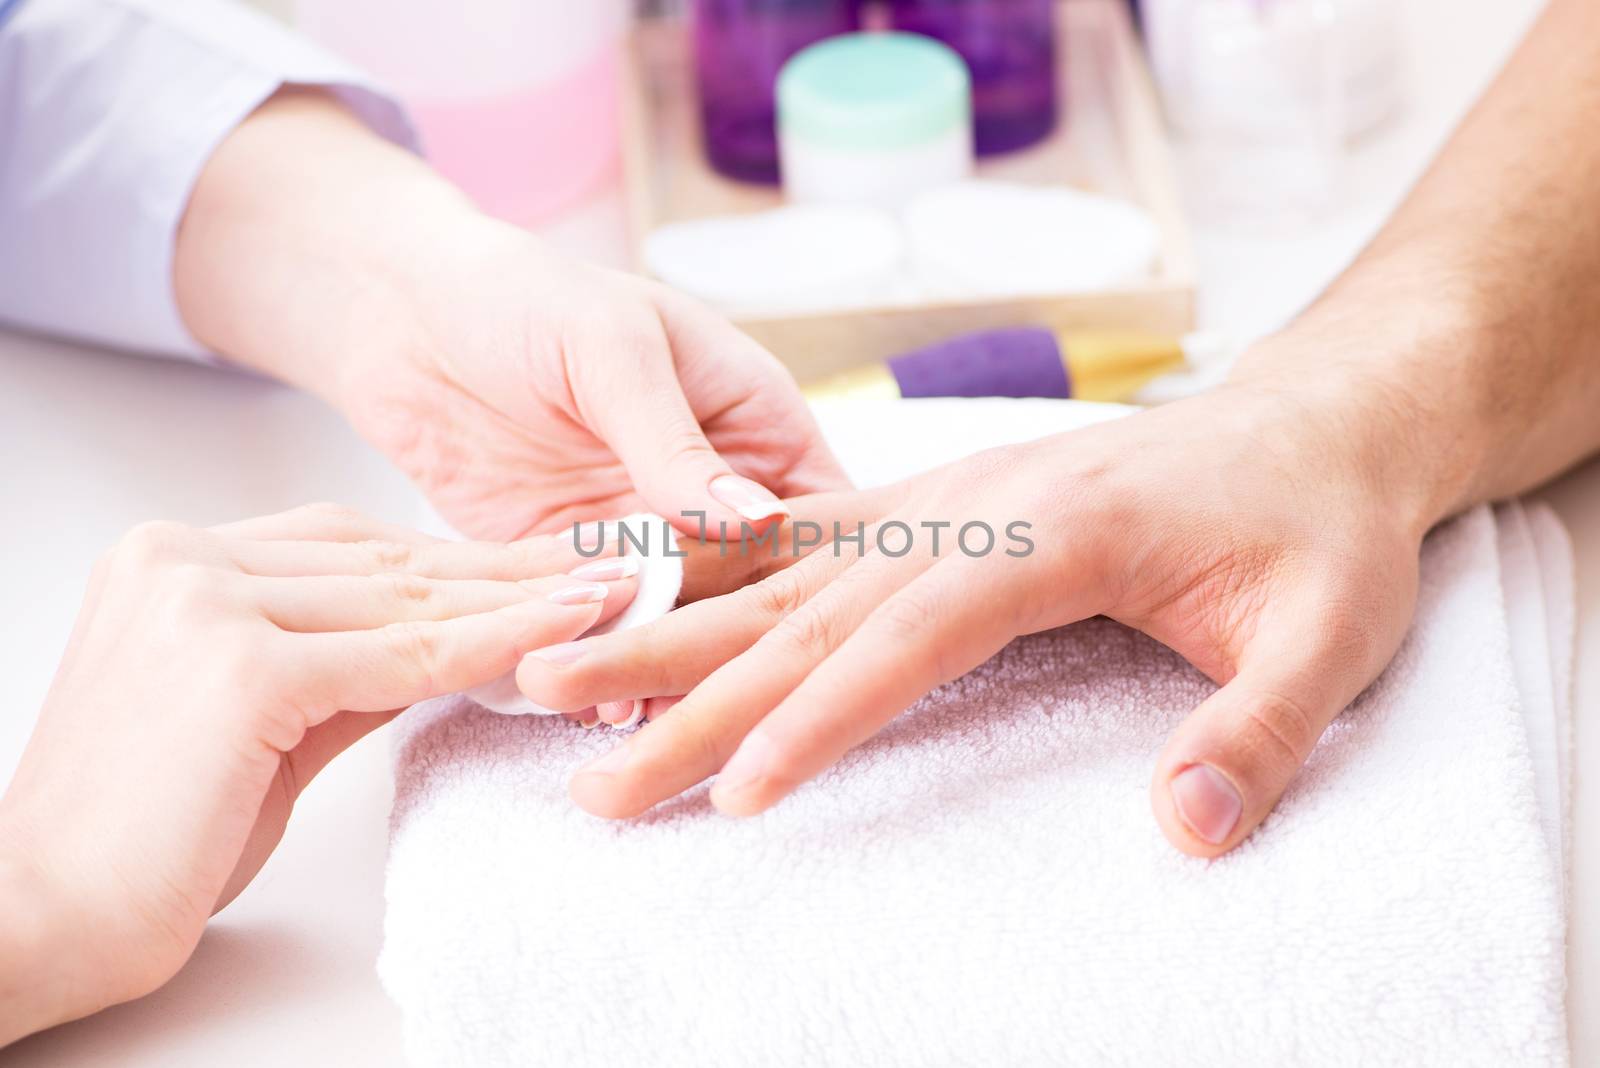 Hands during manicure care session by Elnur